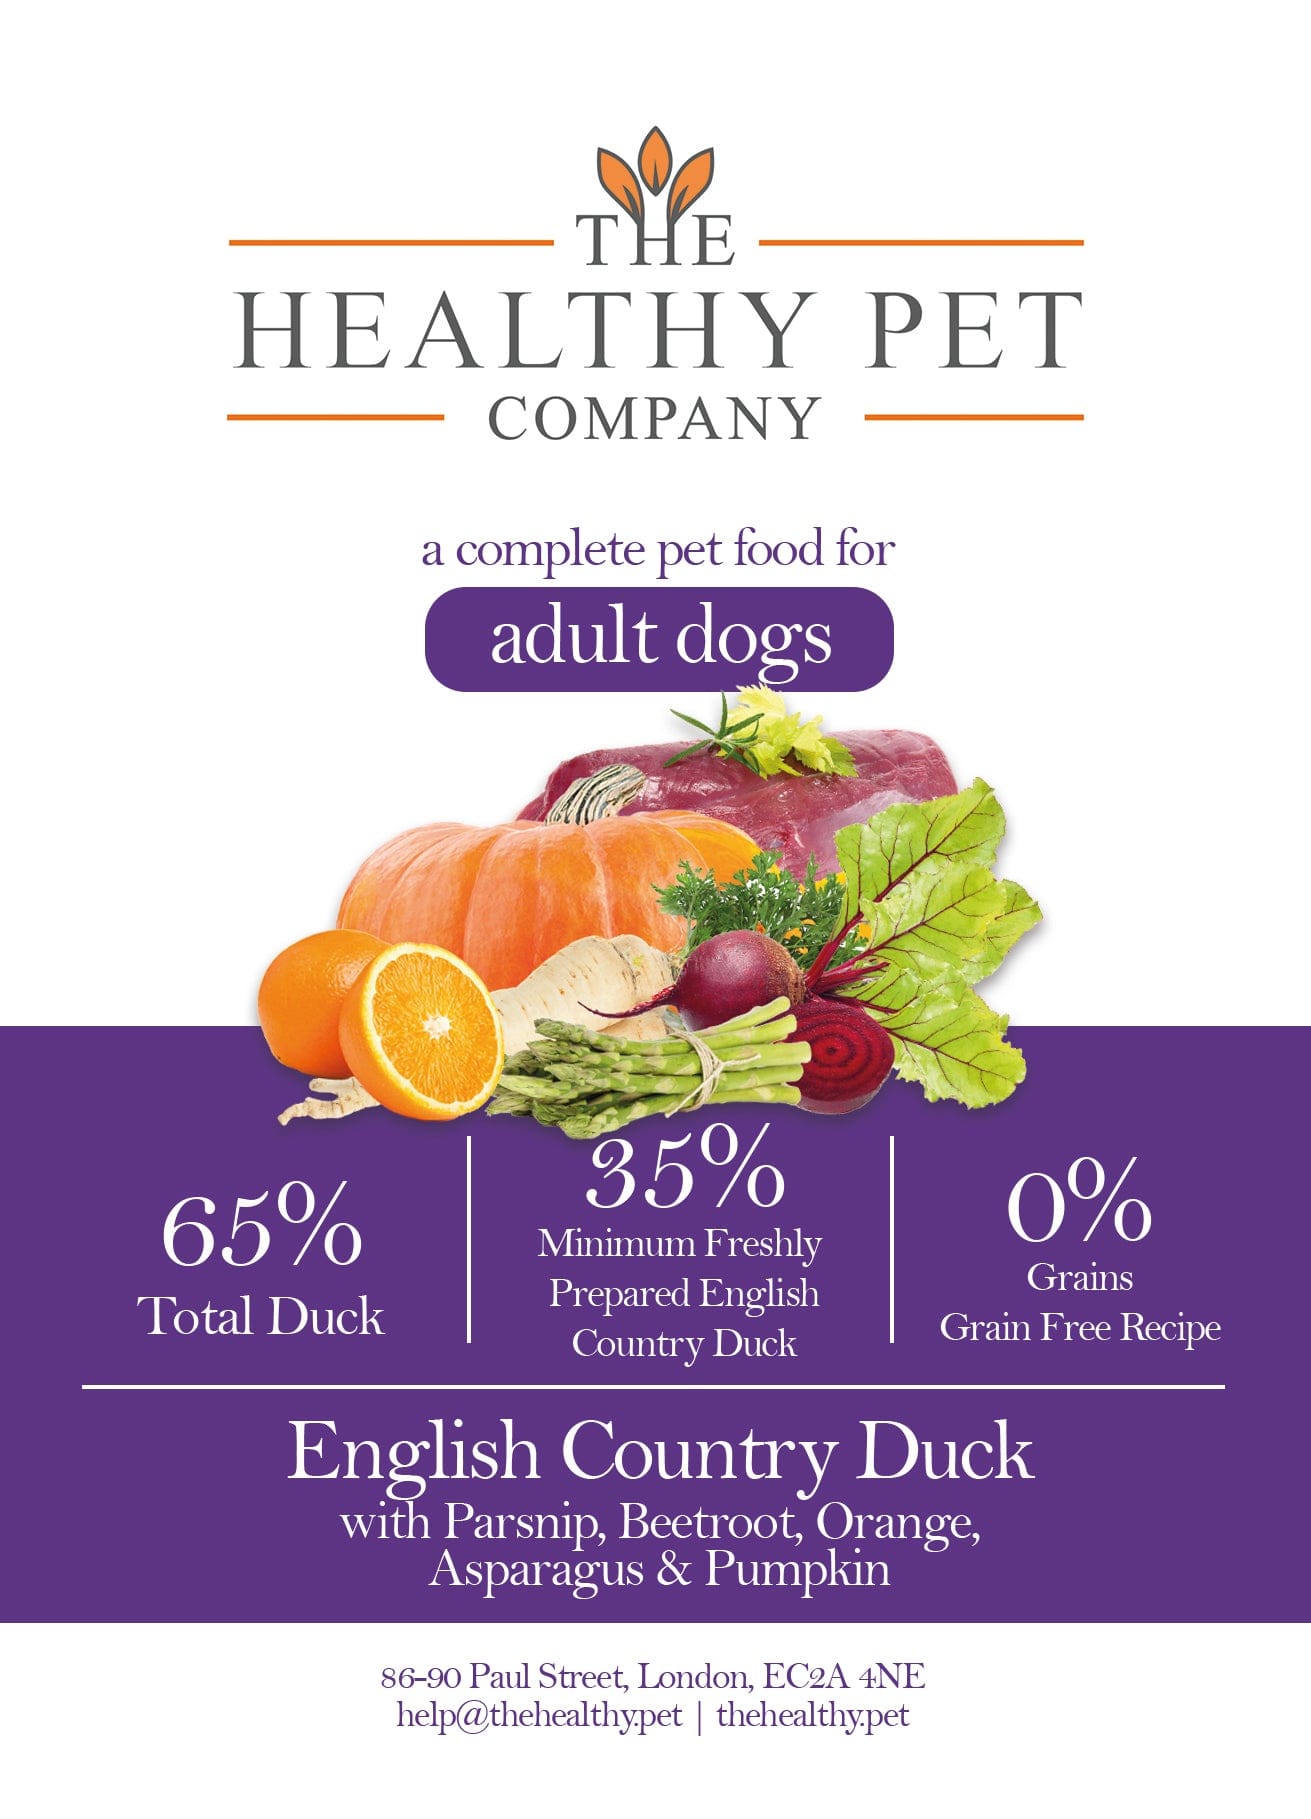 The Healthy Pet Company Complete Meal - Duck with Veg & Fruit for Adult Dogs - The Healthy Pet Company